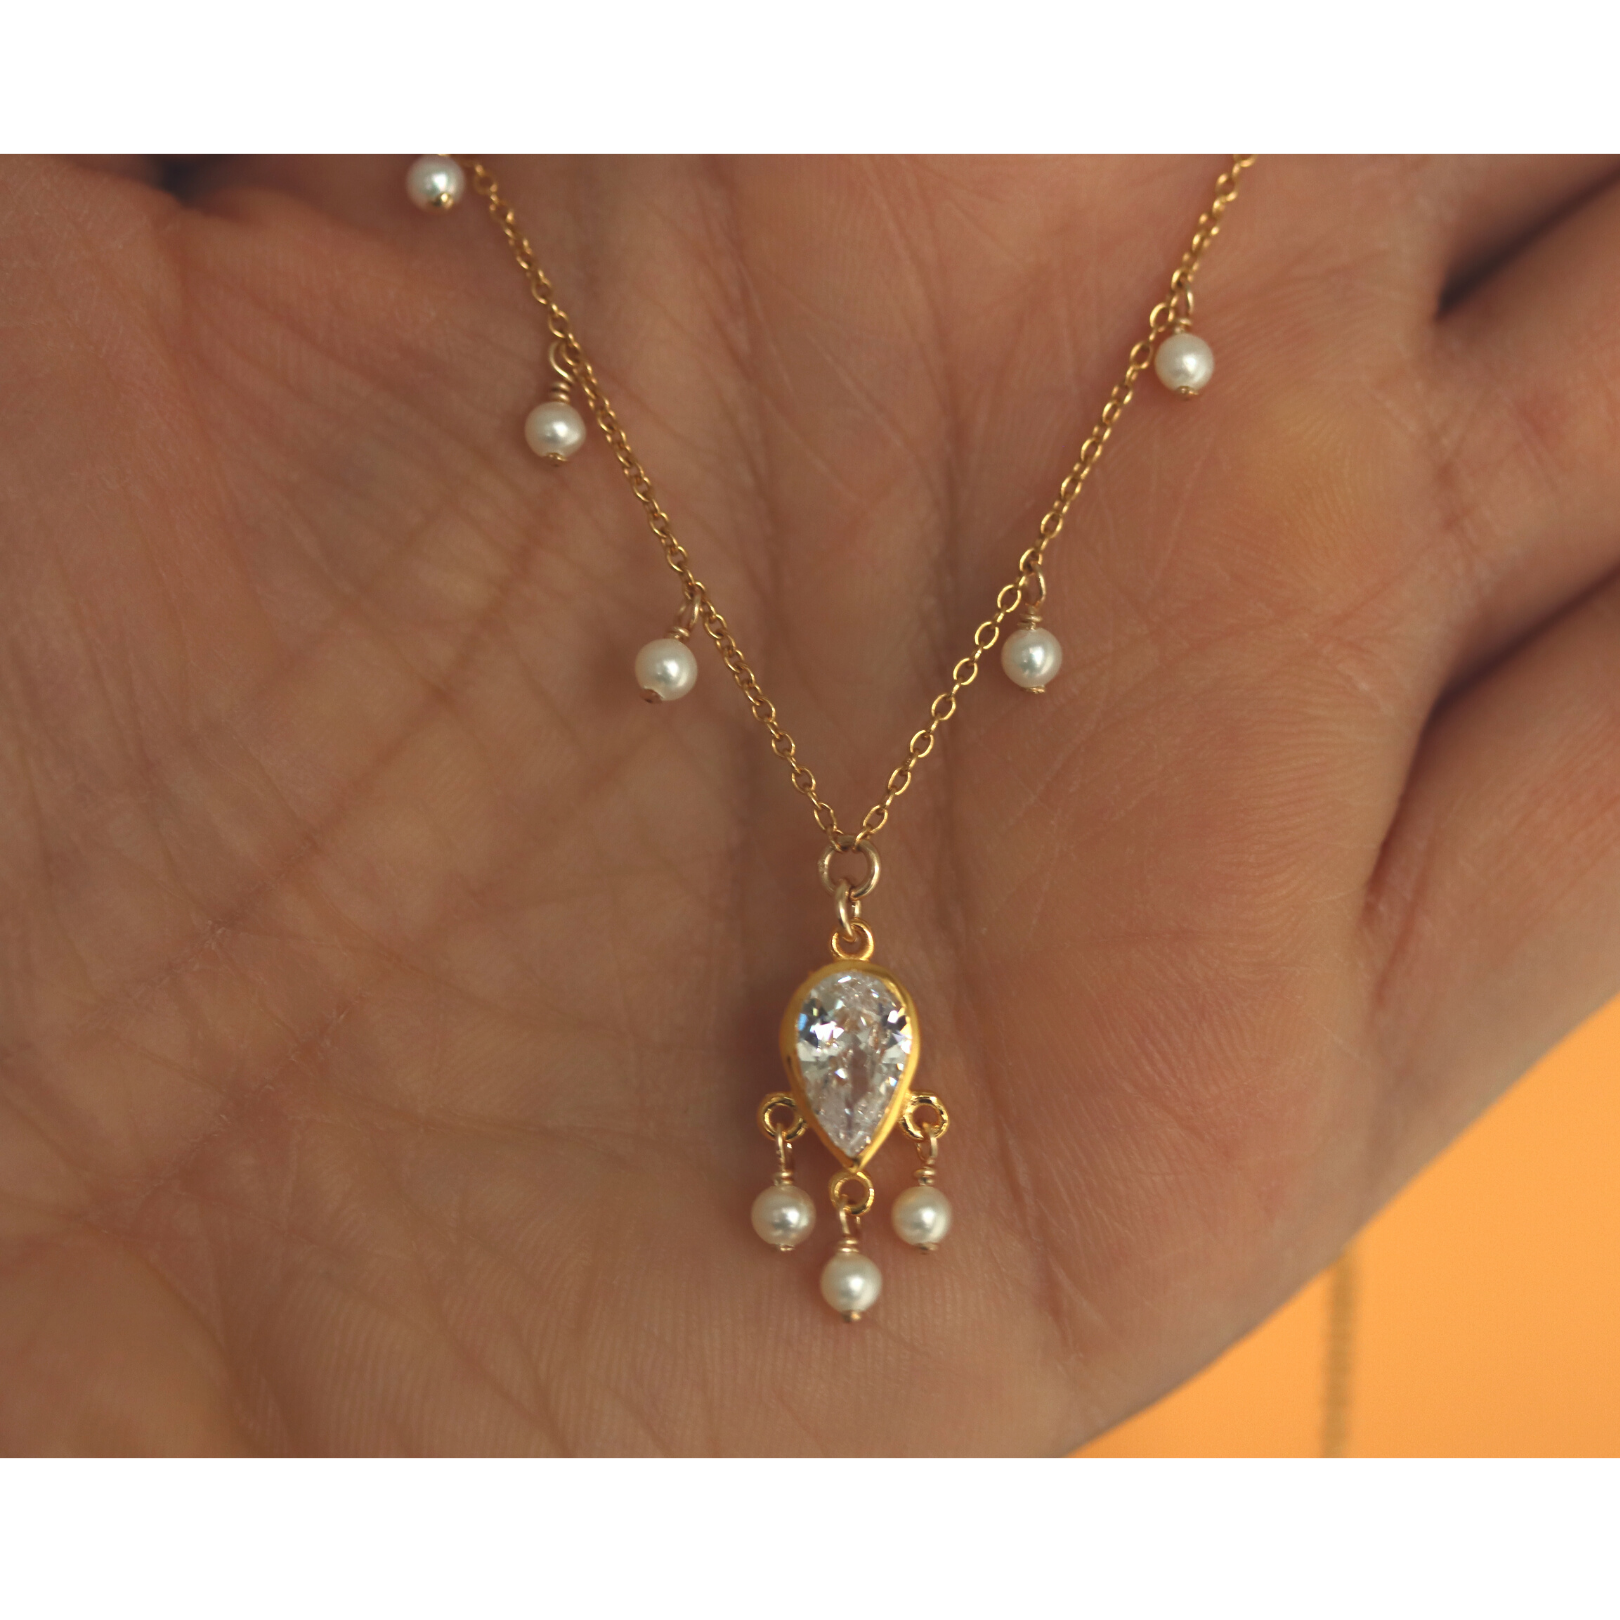 Teardrop necklace with seed pearls